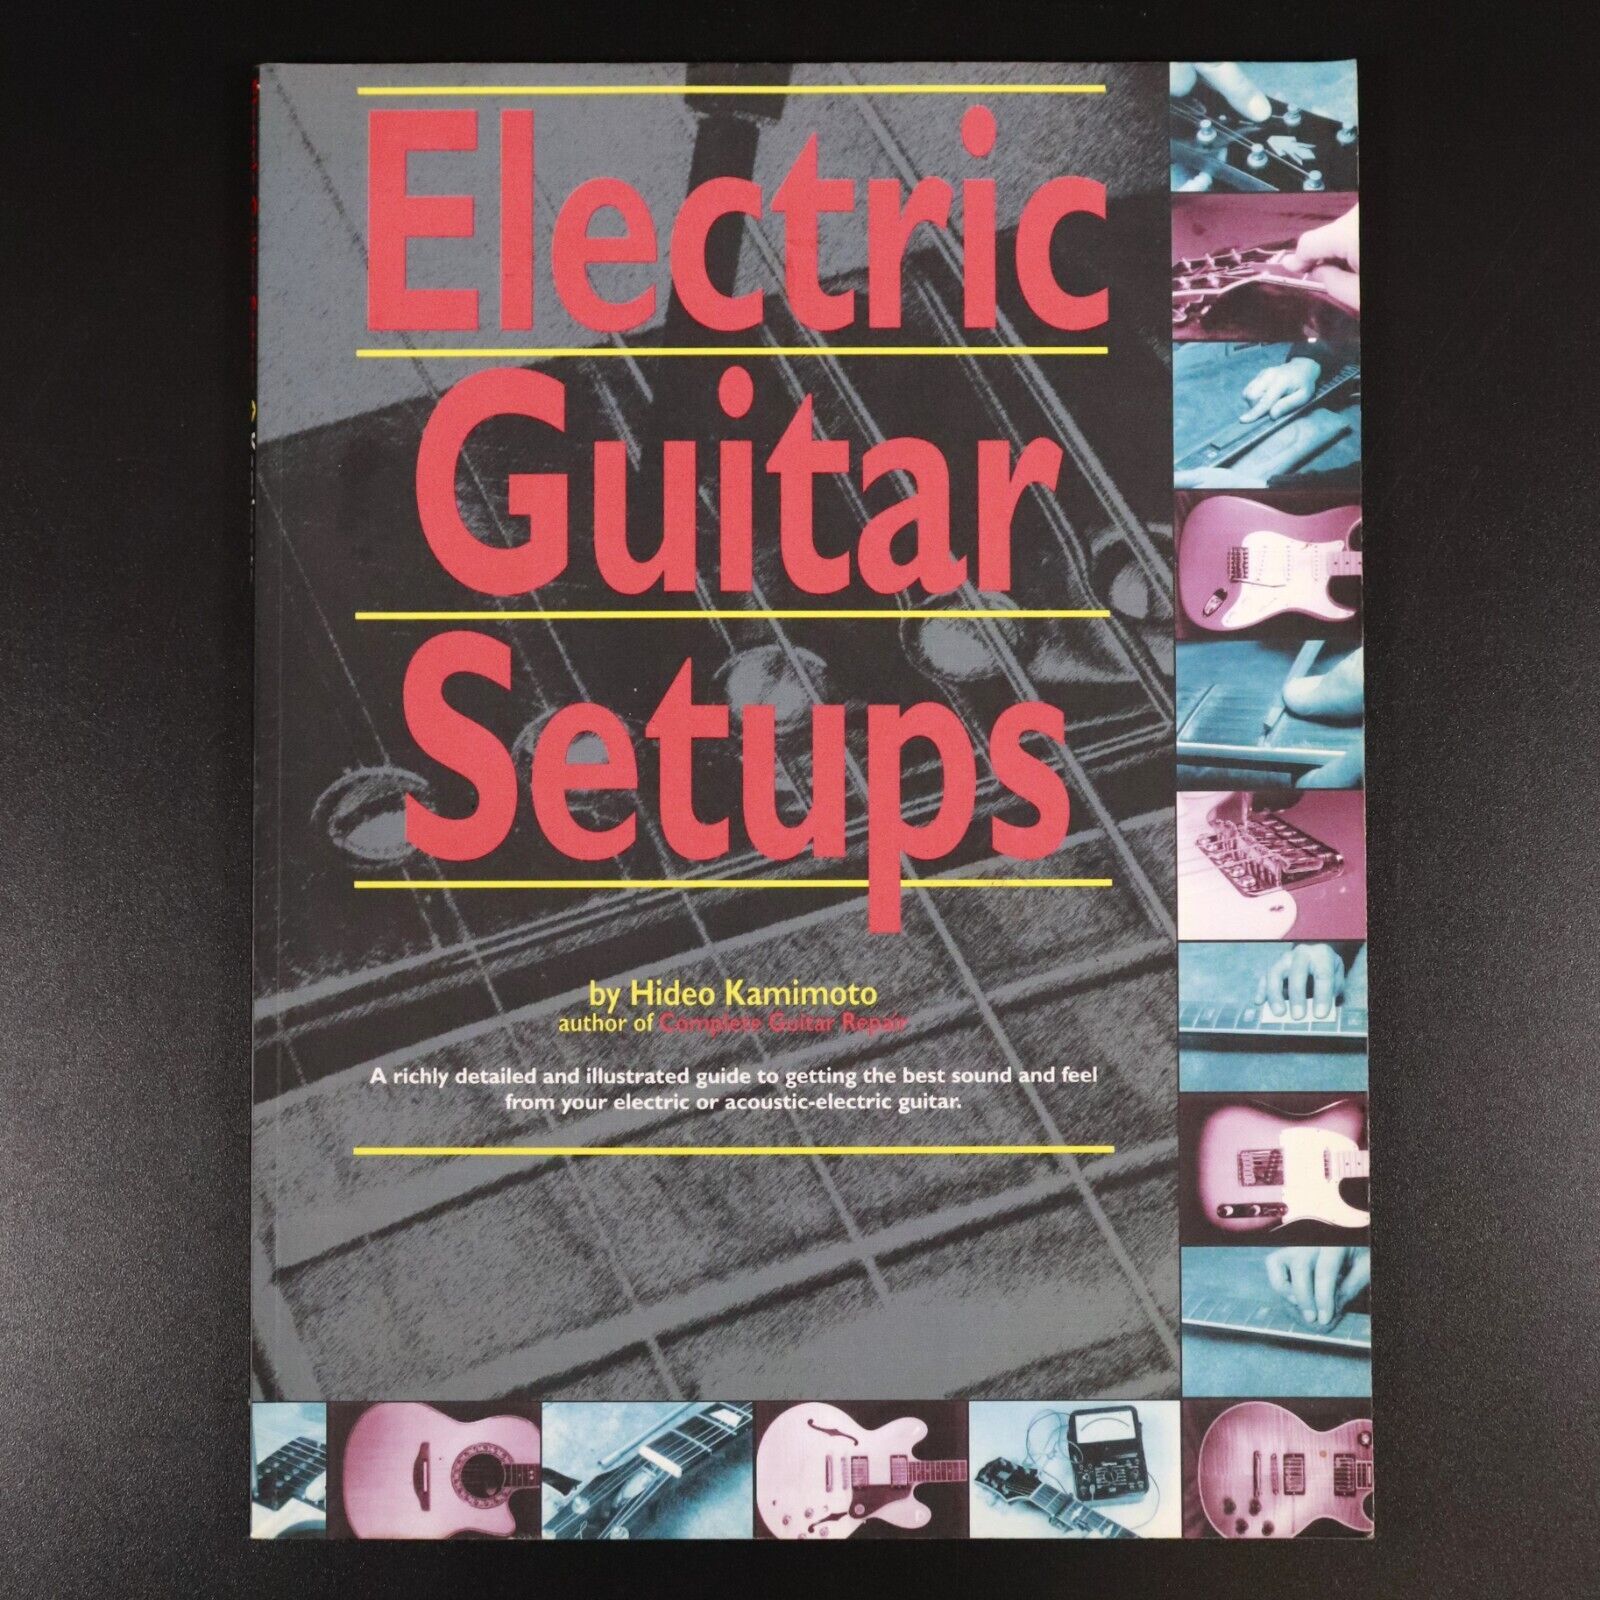 c2010 Electric Guitar Setups by Hideo Kamimoto Illustrated Guitar Reference Book